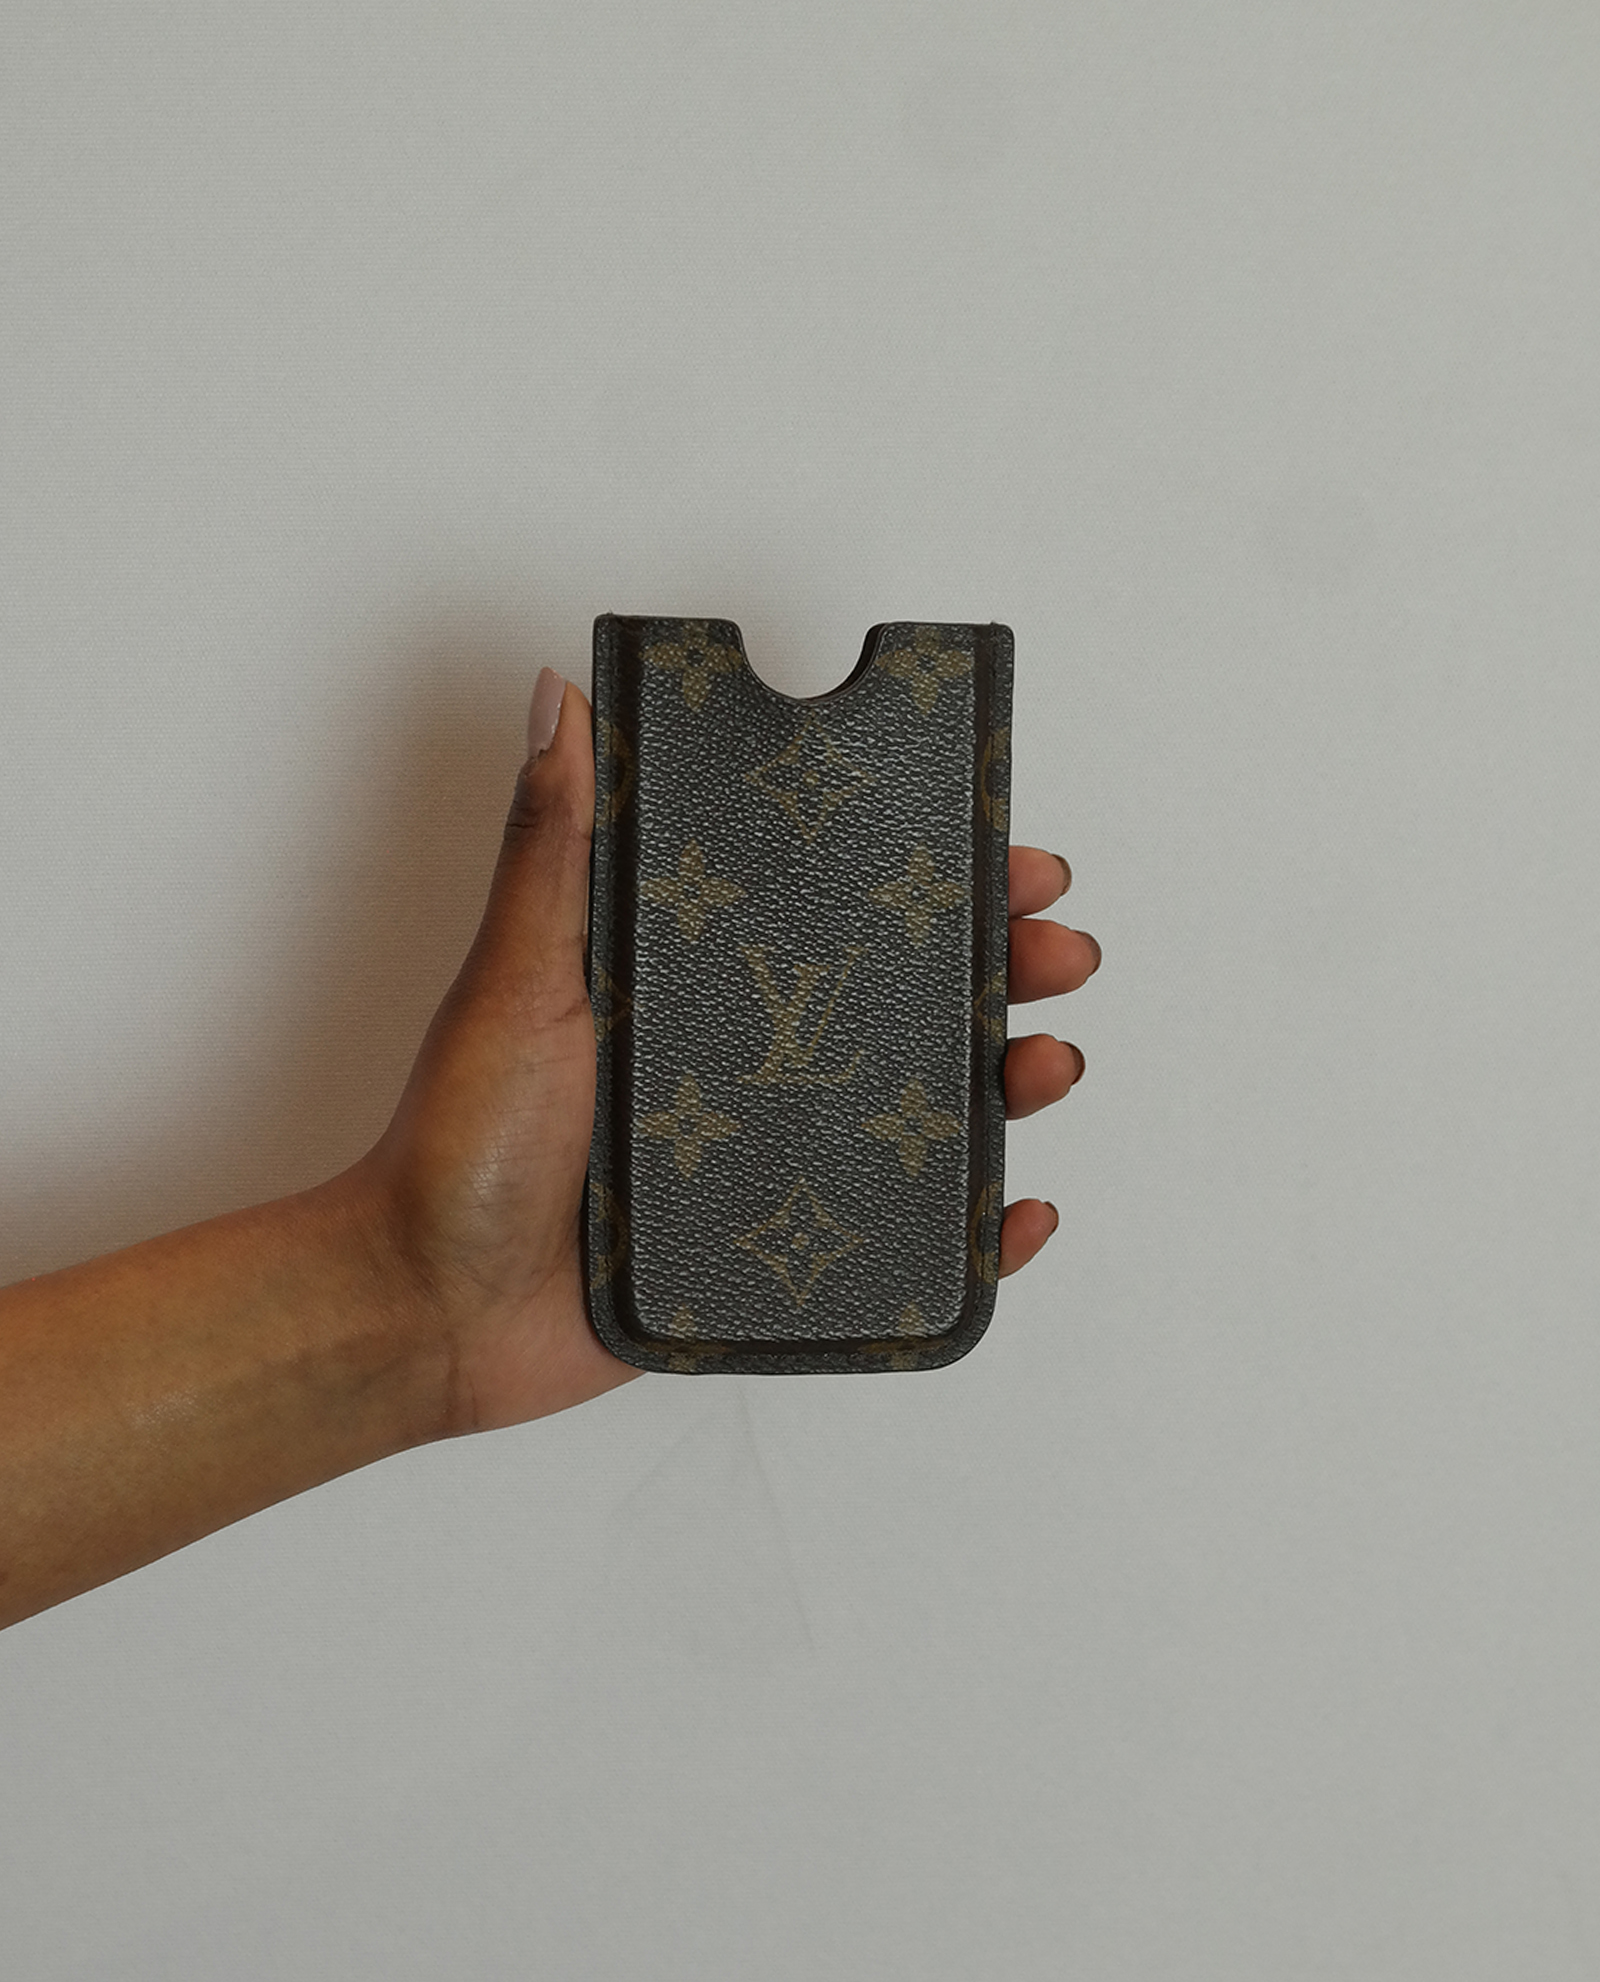 Louis Vuitton 5 Case, Small Leather Goods - Designer Buy Sell